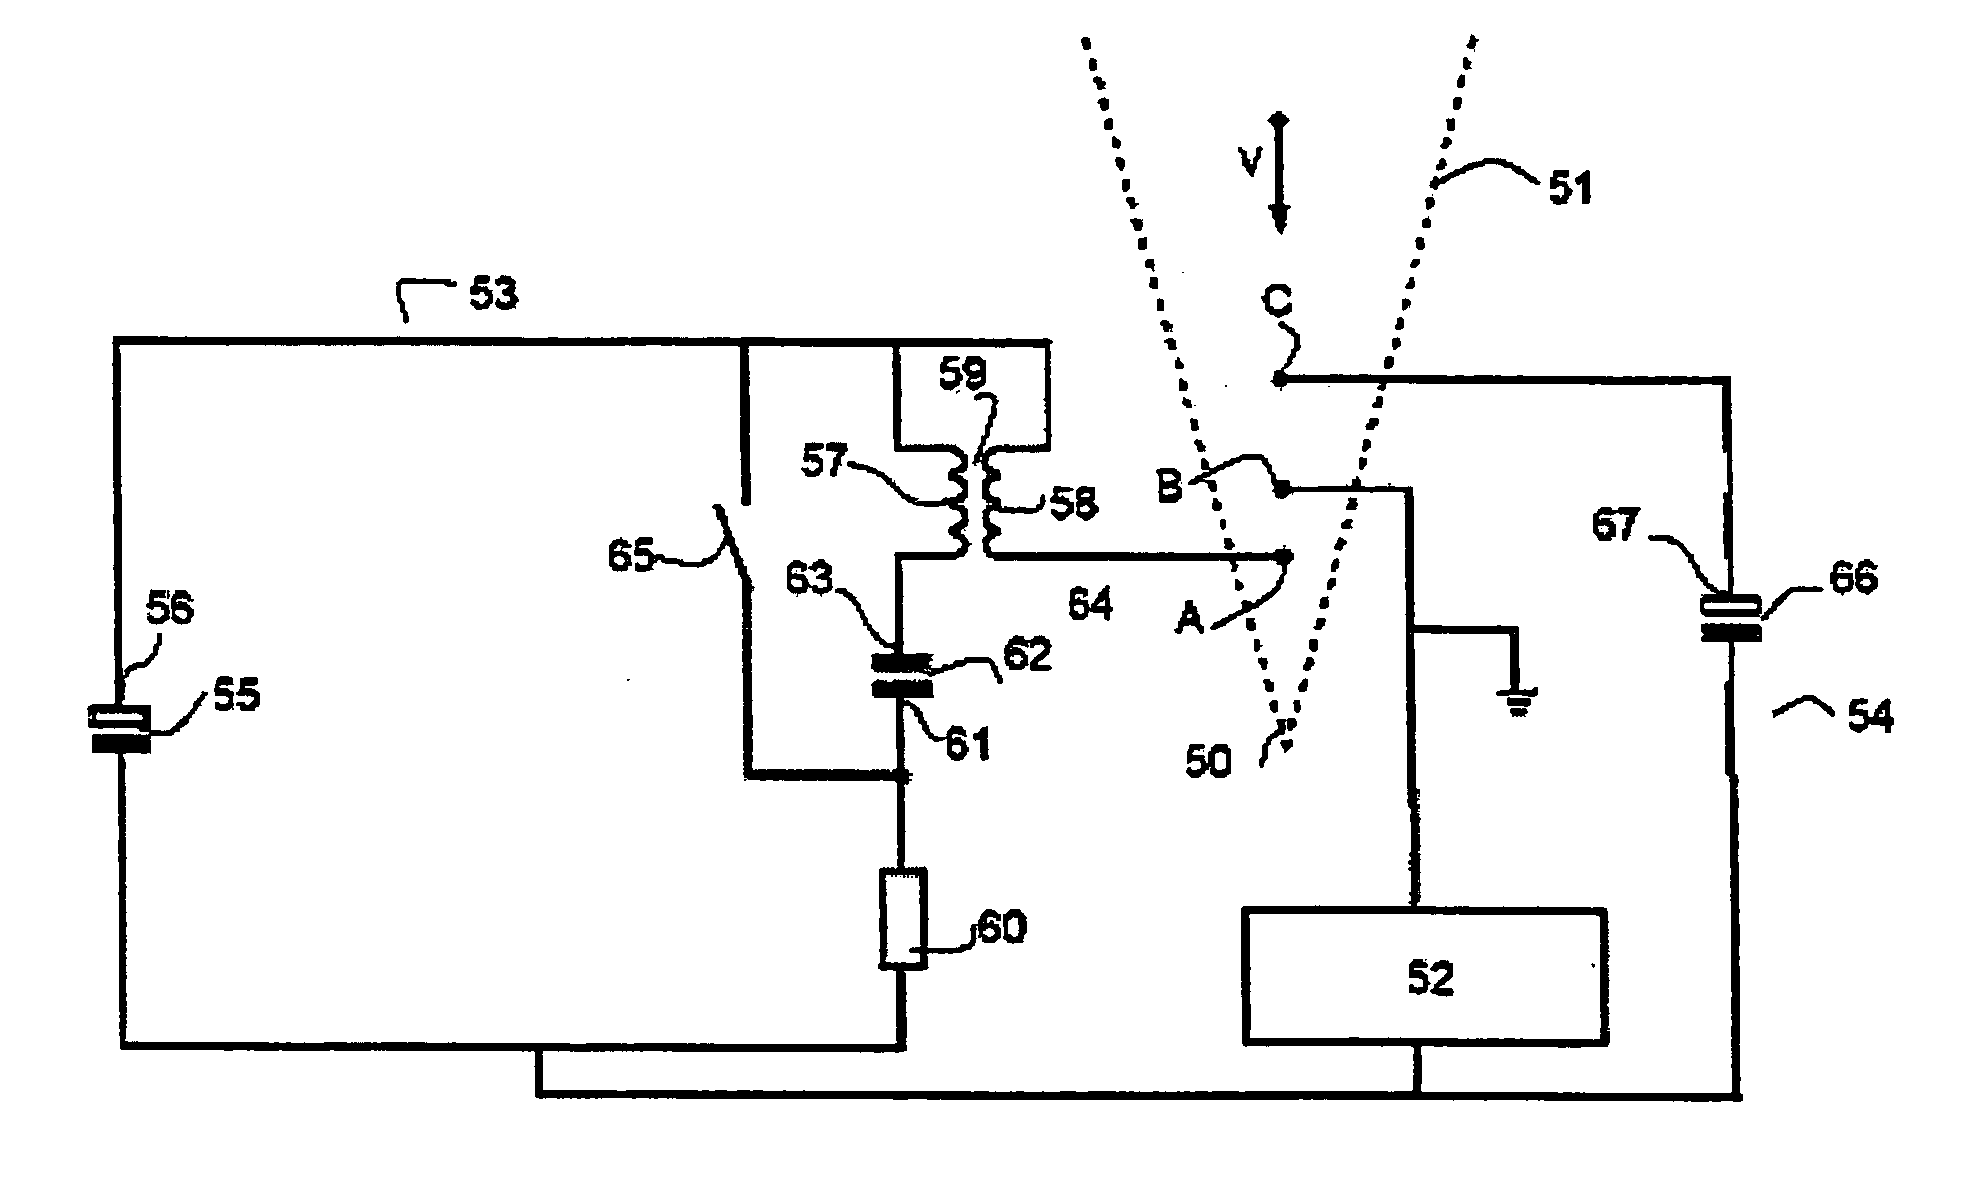 Low voltage device for the generation of plasma discharge to operate a supersonic or hypersonic apparatus